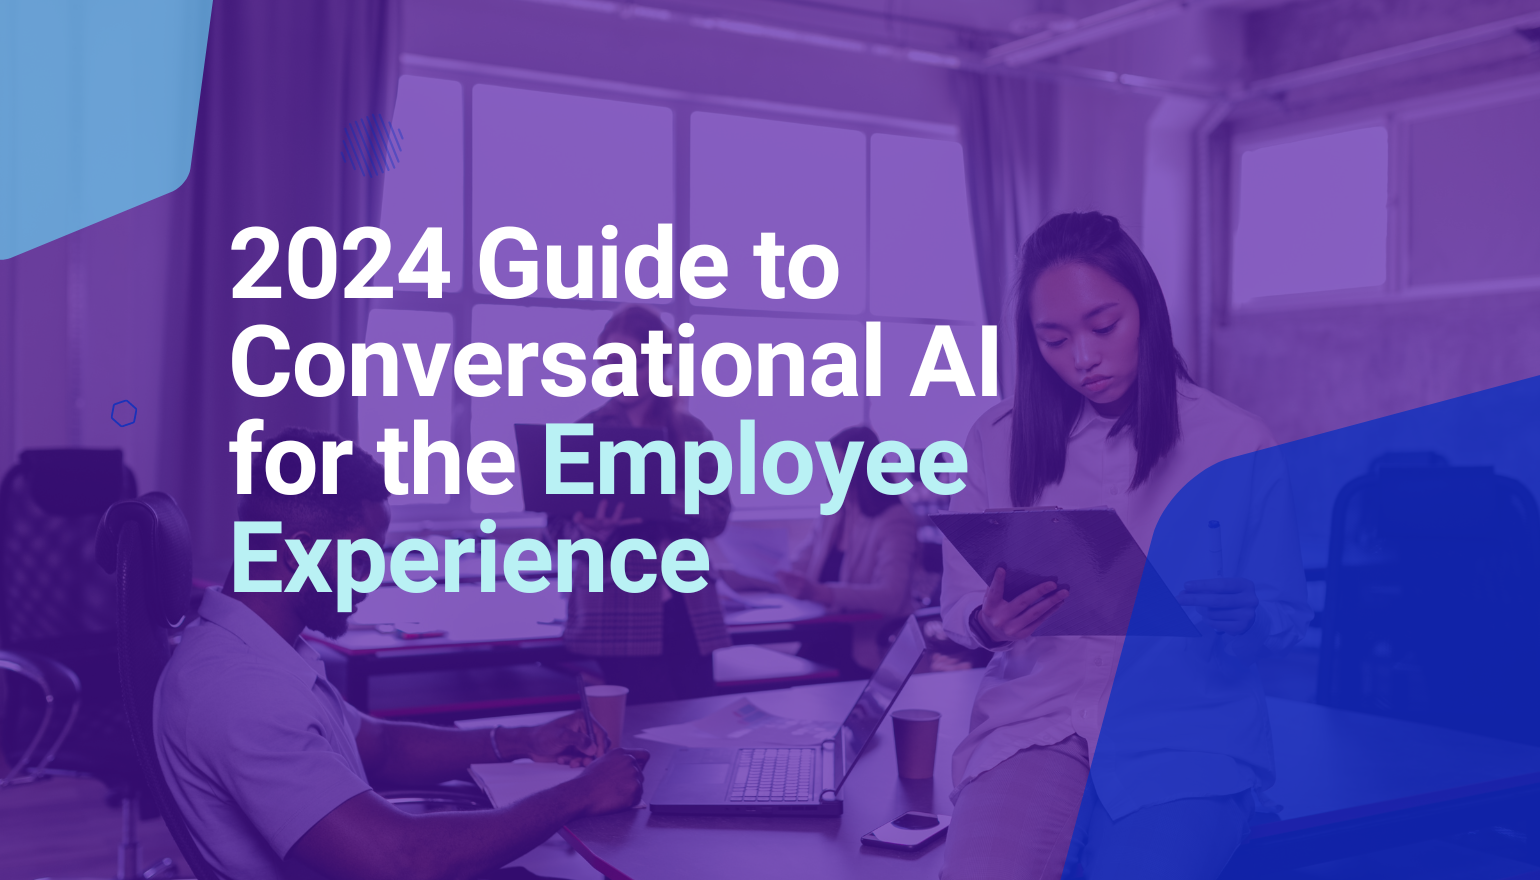 2024 Guide to Conversational AI for the Employee Experience